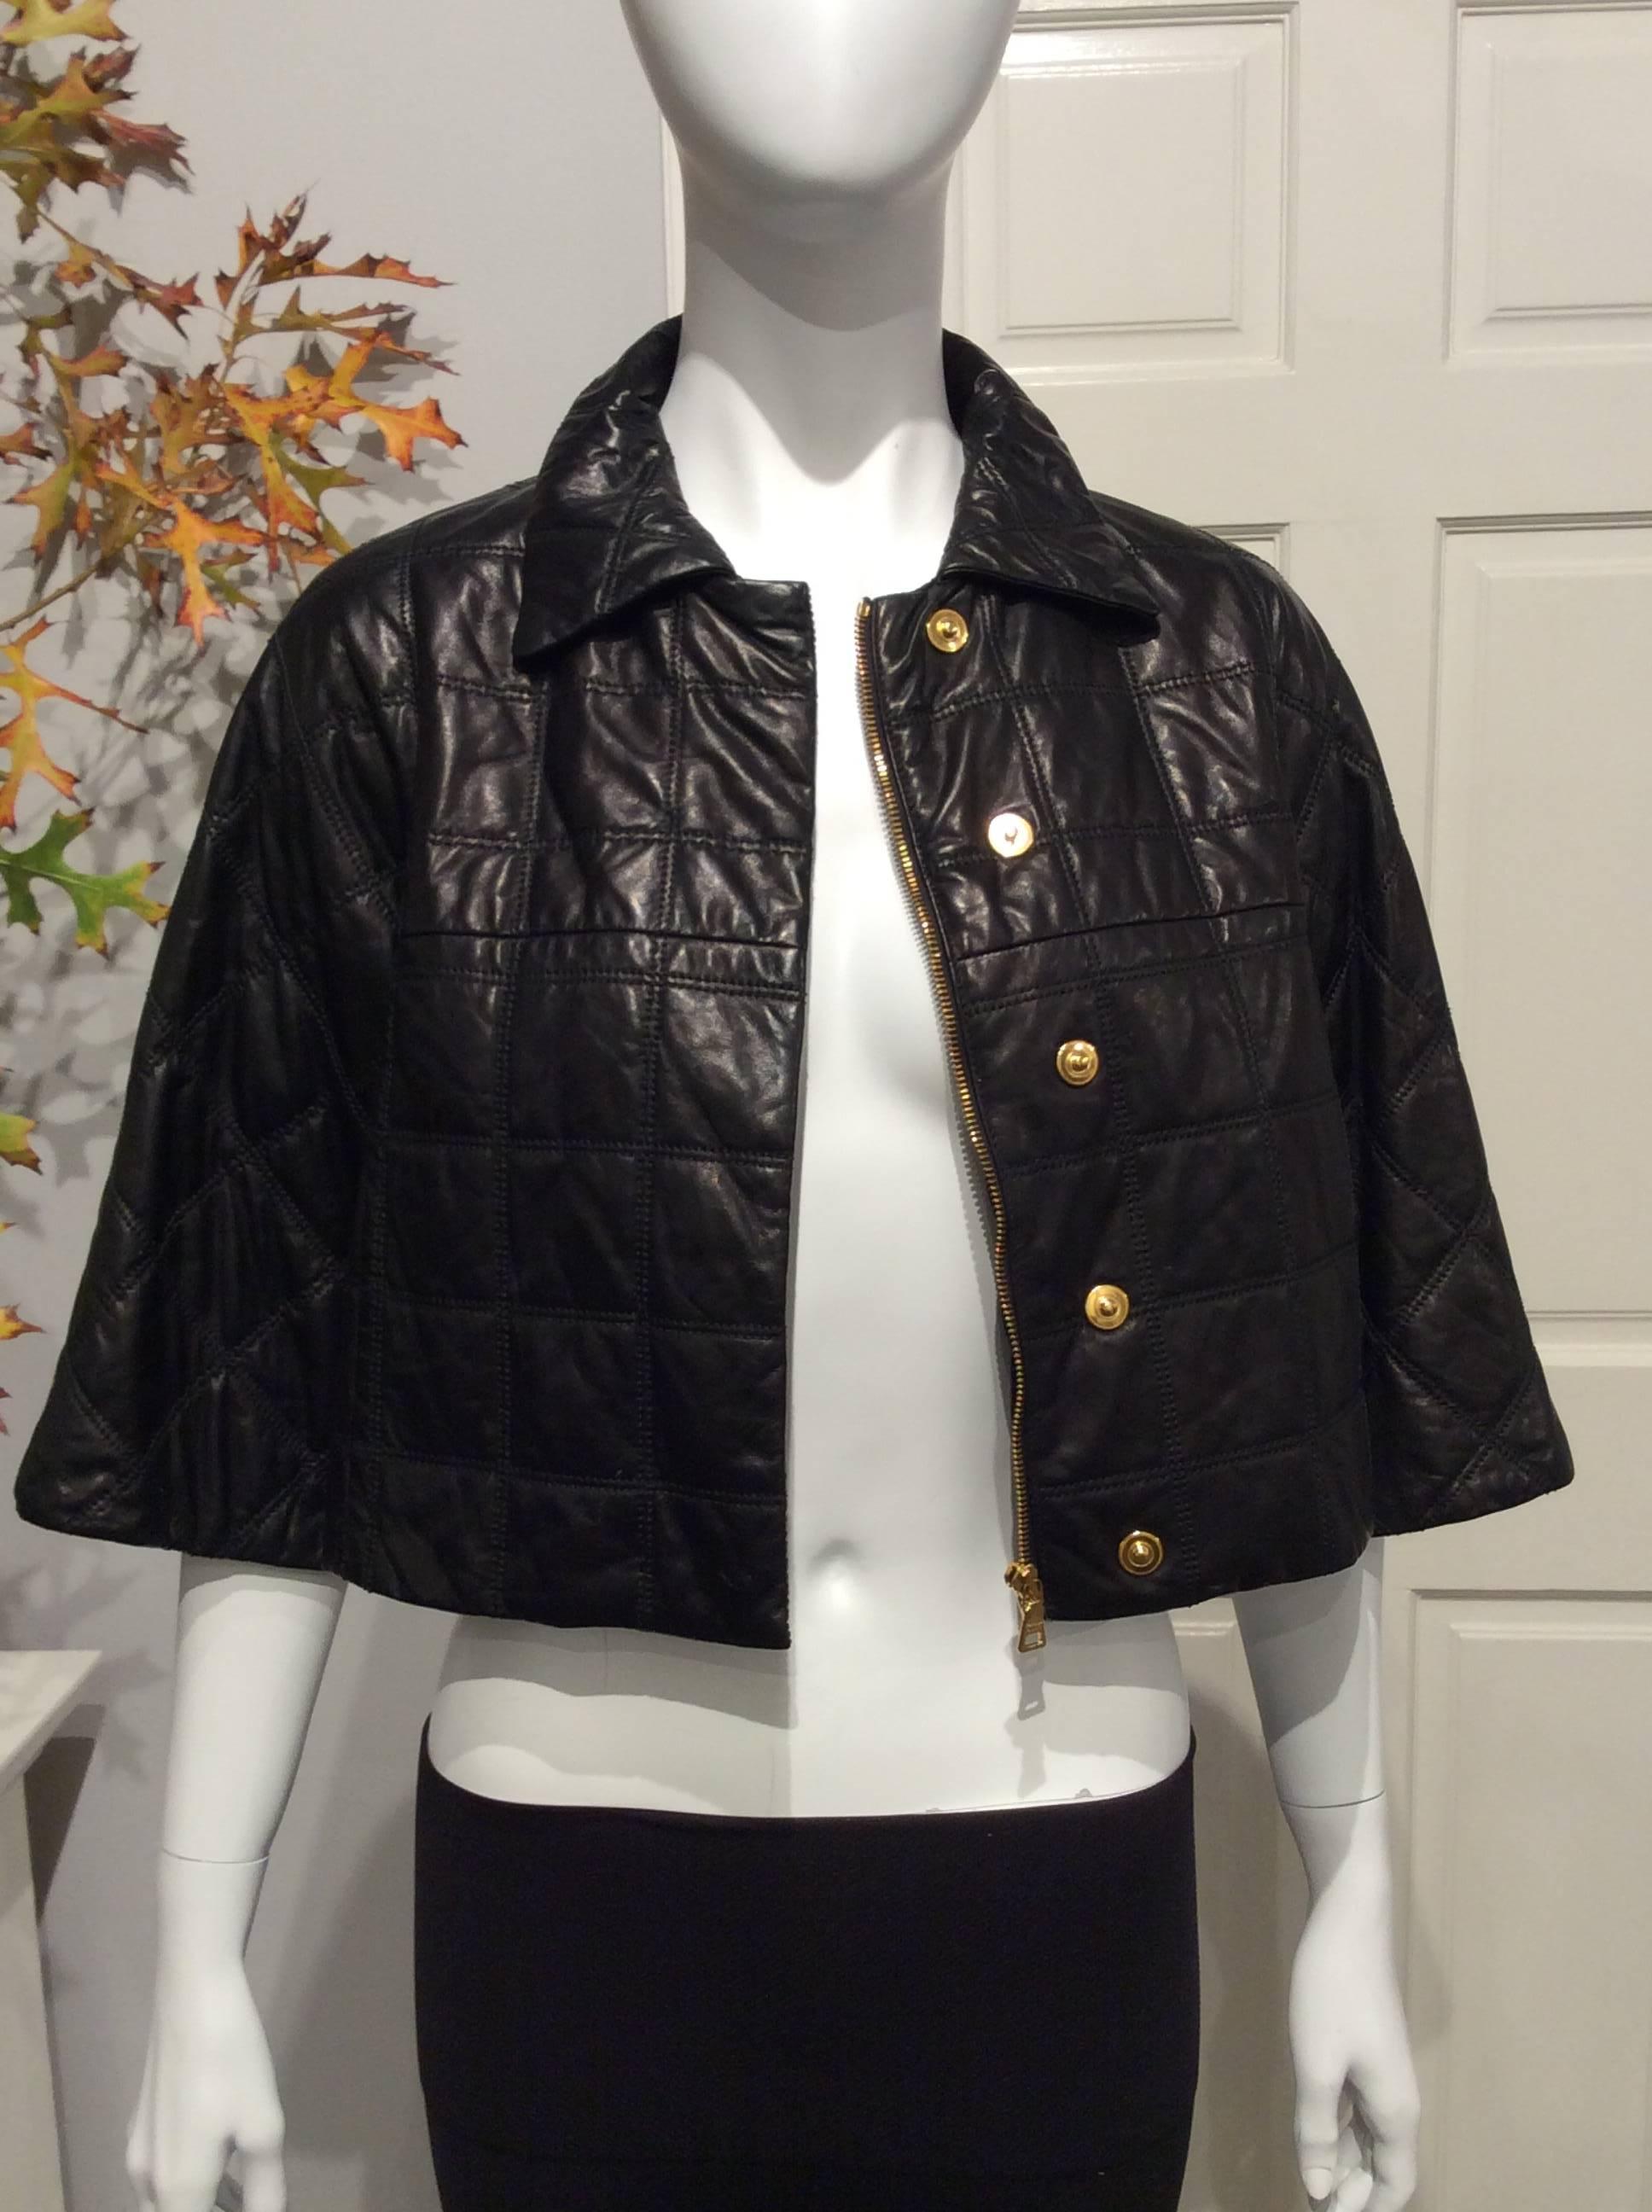 Prada Black With Quilted Pattern Leather Jacket Sz 38 (Us 2) For Sale 1